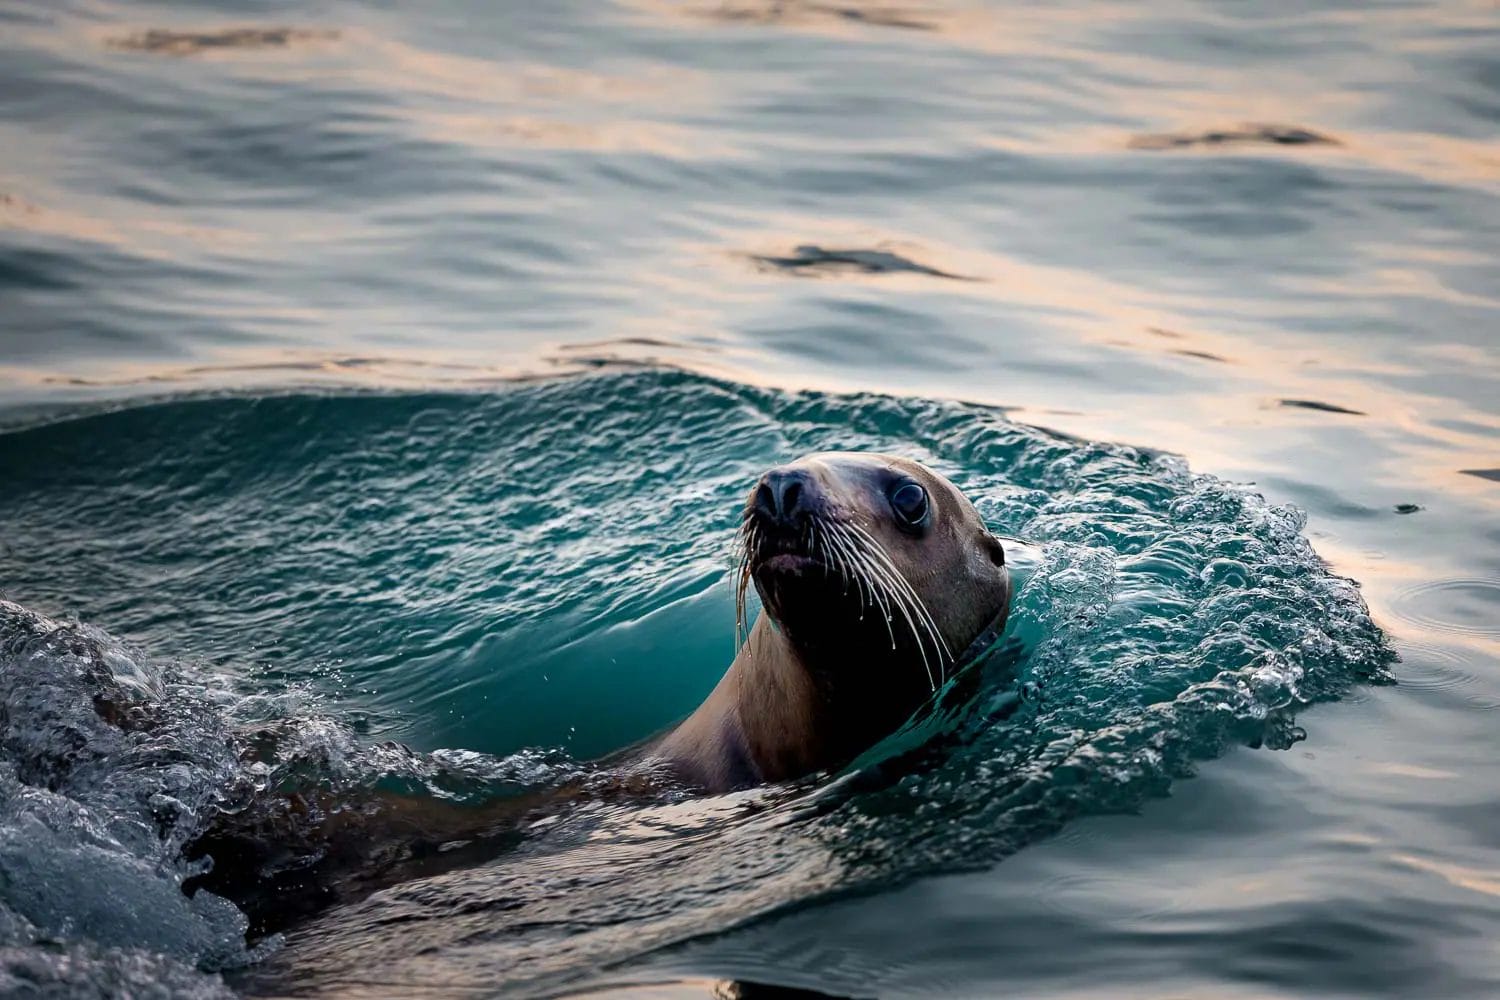 A seal swimming in the water, with its head emerging from the surface creating ripples.